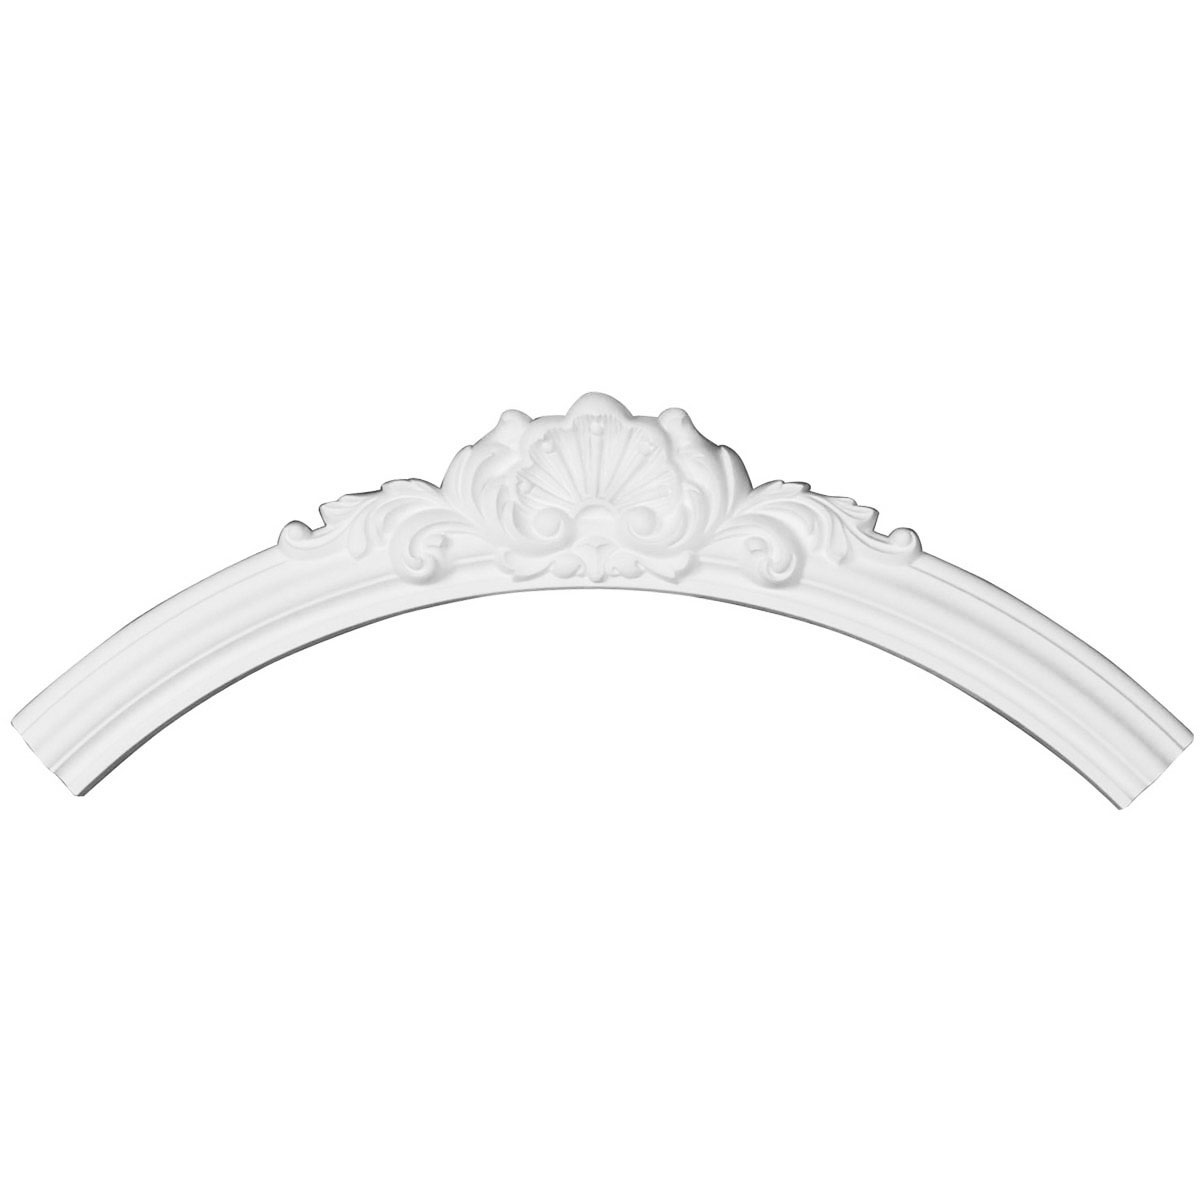 40.63 x 35.5 x 2.63 x 0.87 in. Shell Ceiling Ring - 0.25 of Complete Circle -  DwellingDesigns, DW638974